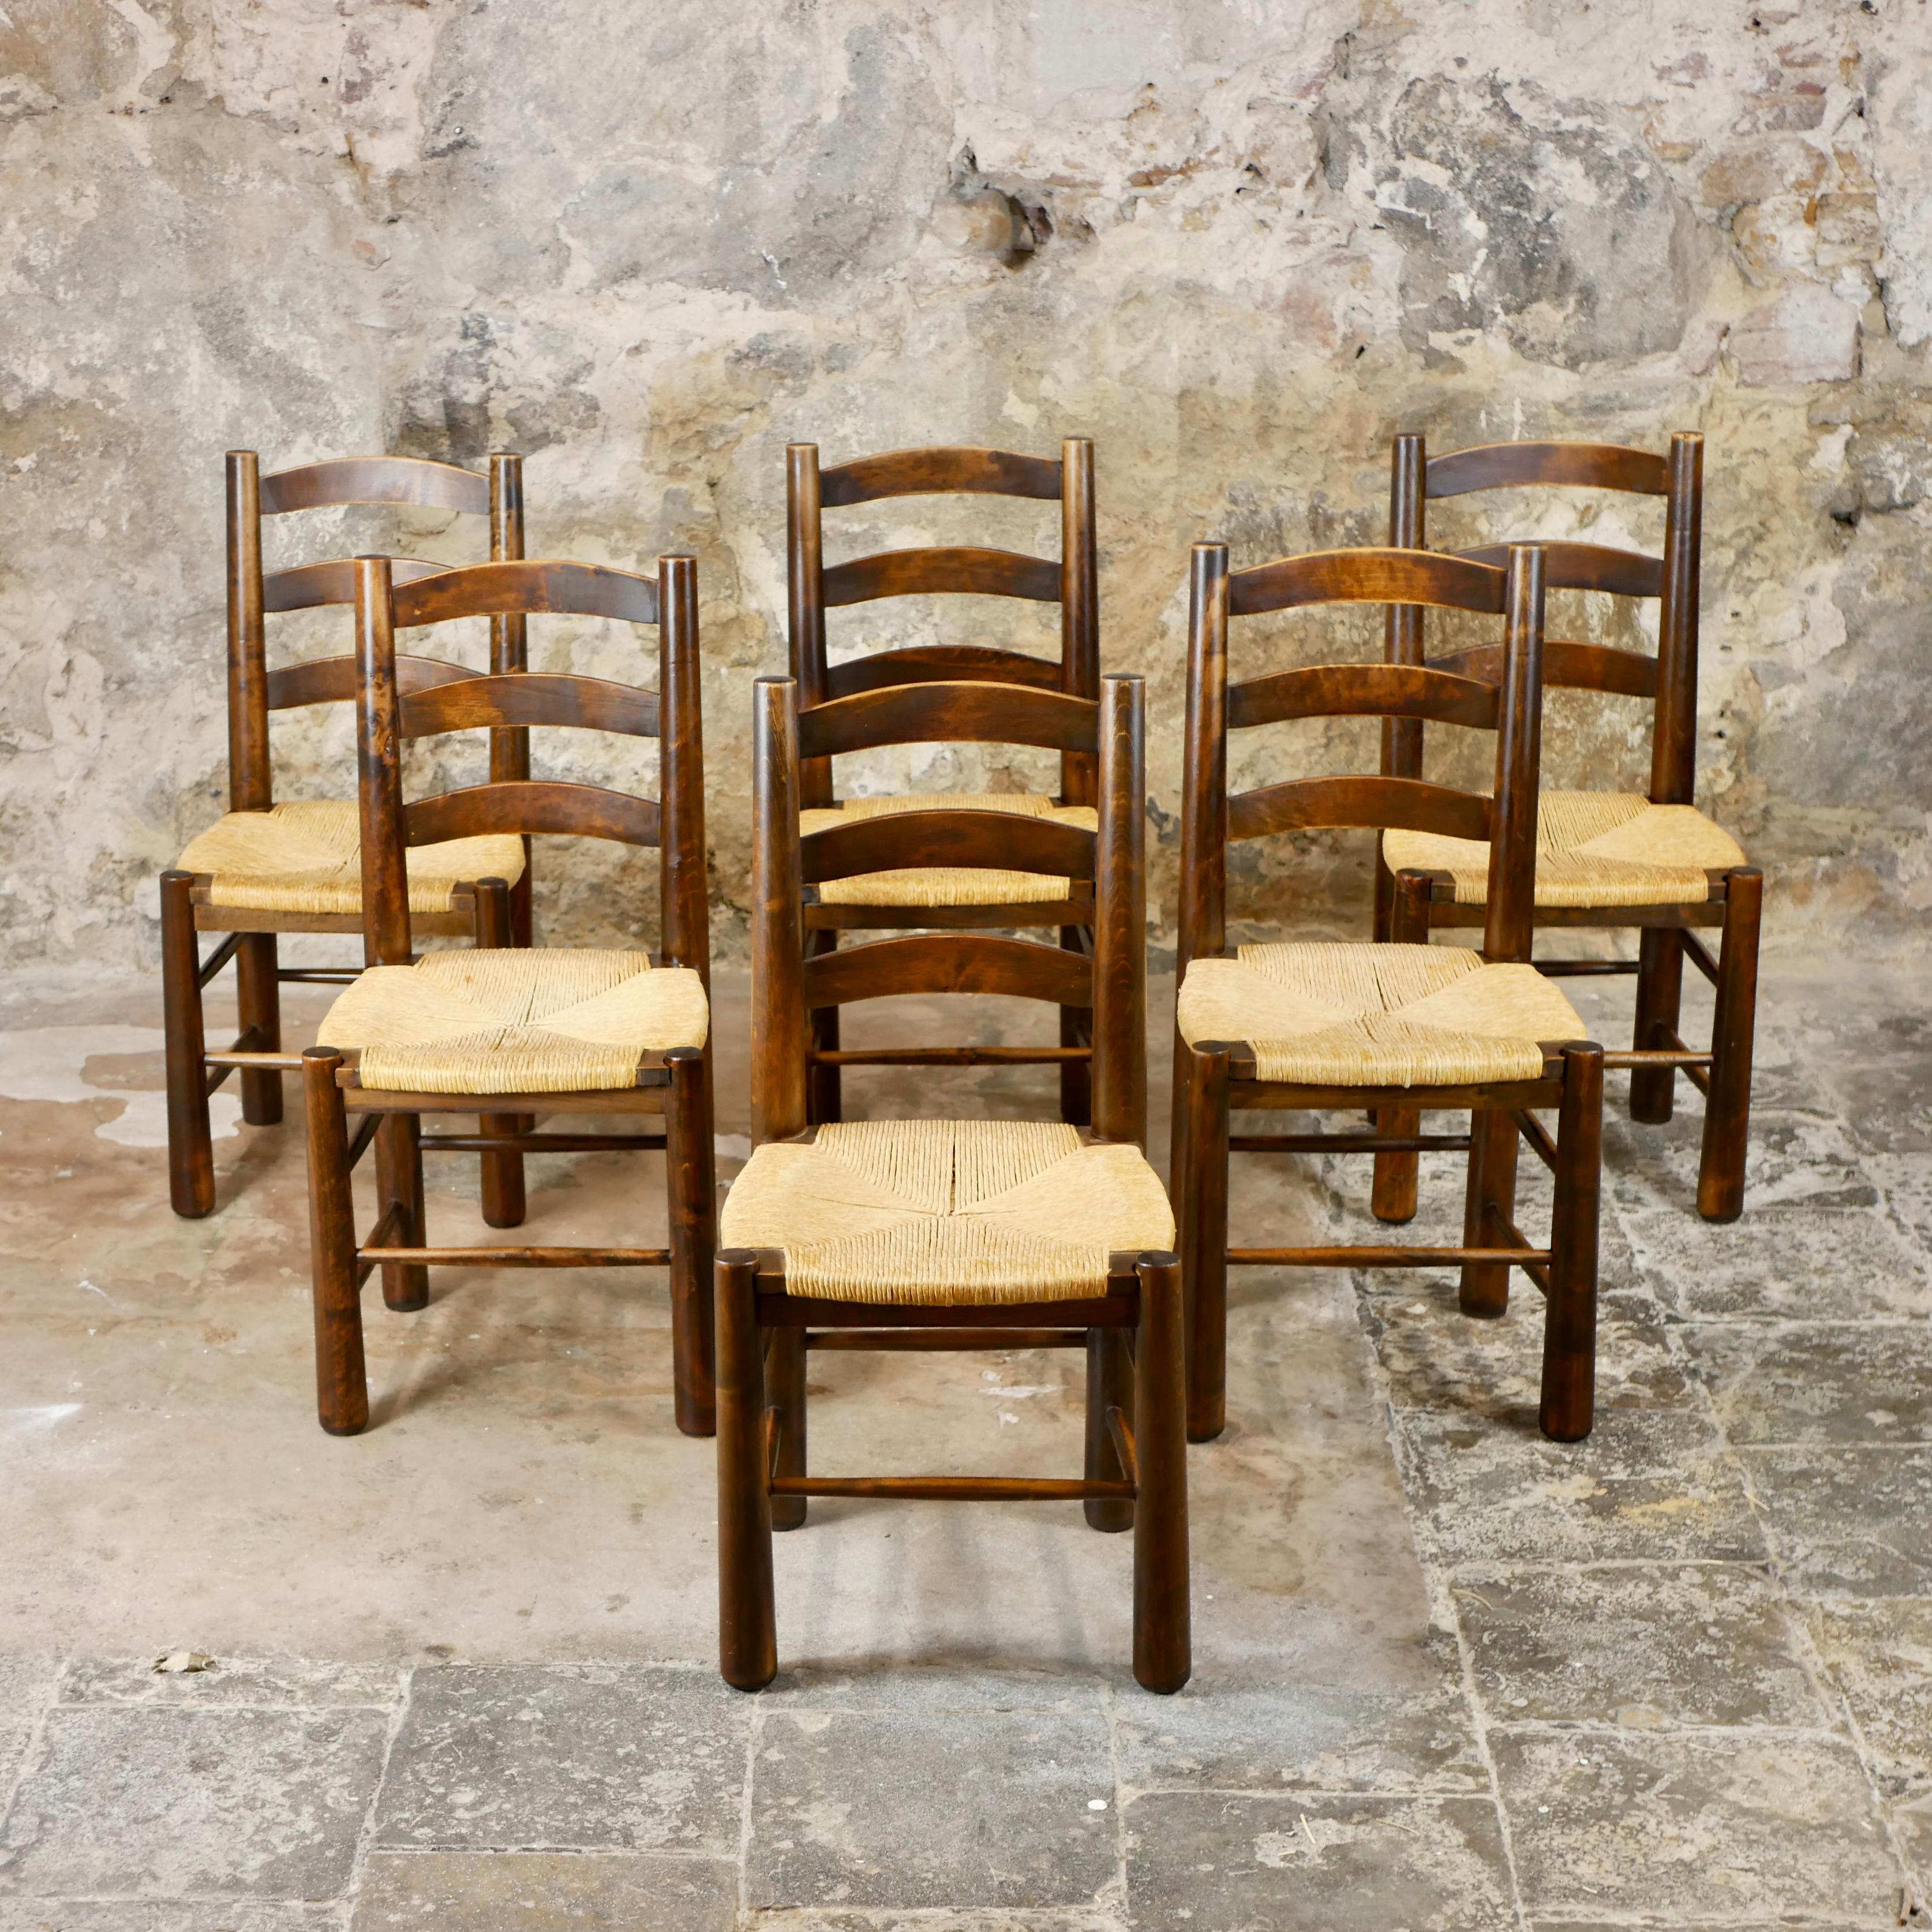 Set of 6 brutalist chairs made in the 1950s in France by Georges Robert.
With its rustic and simple design, they have been made for countryside houses, yet its gorgeous wood grain and conical feet make them very elegant and also perfect for a more